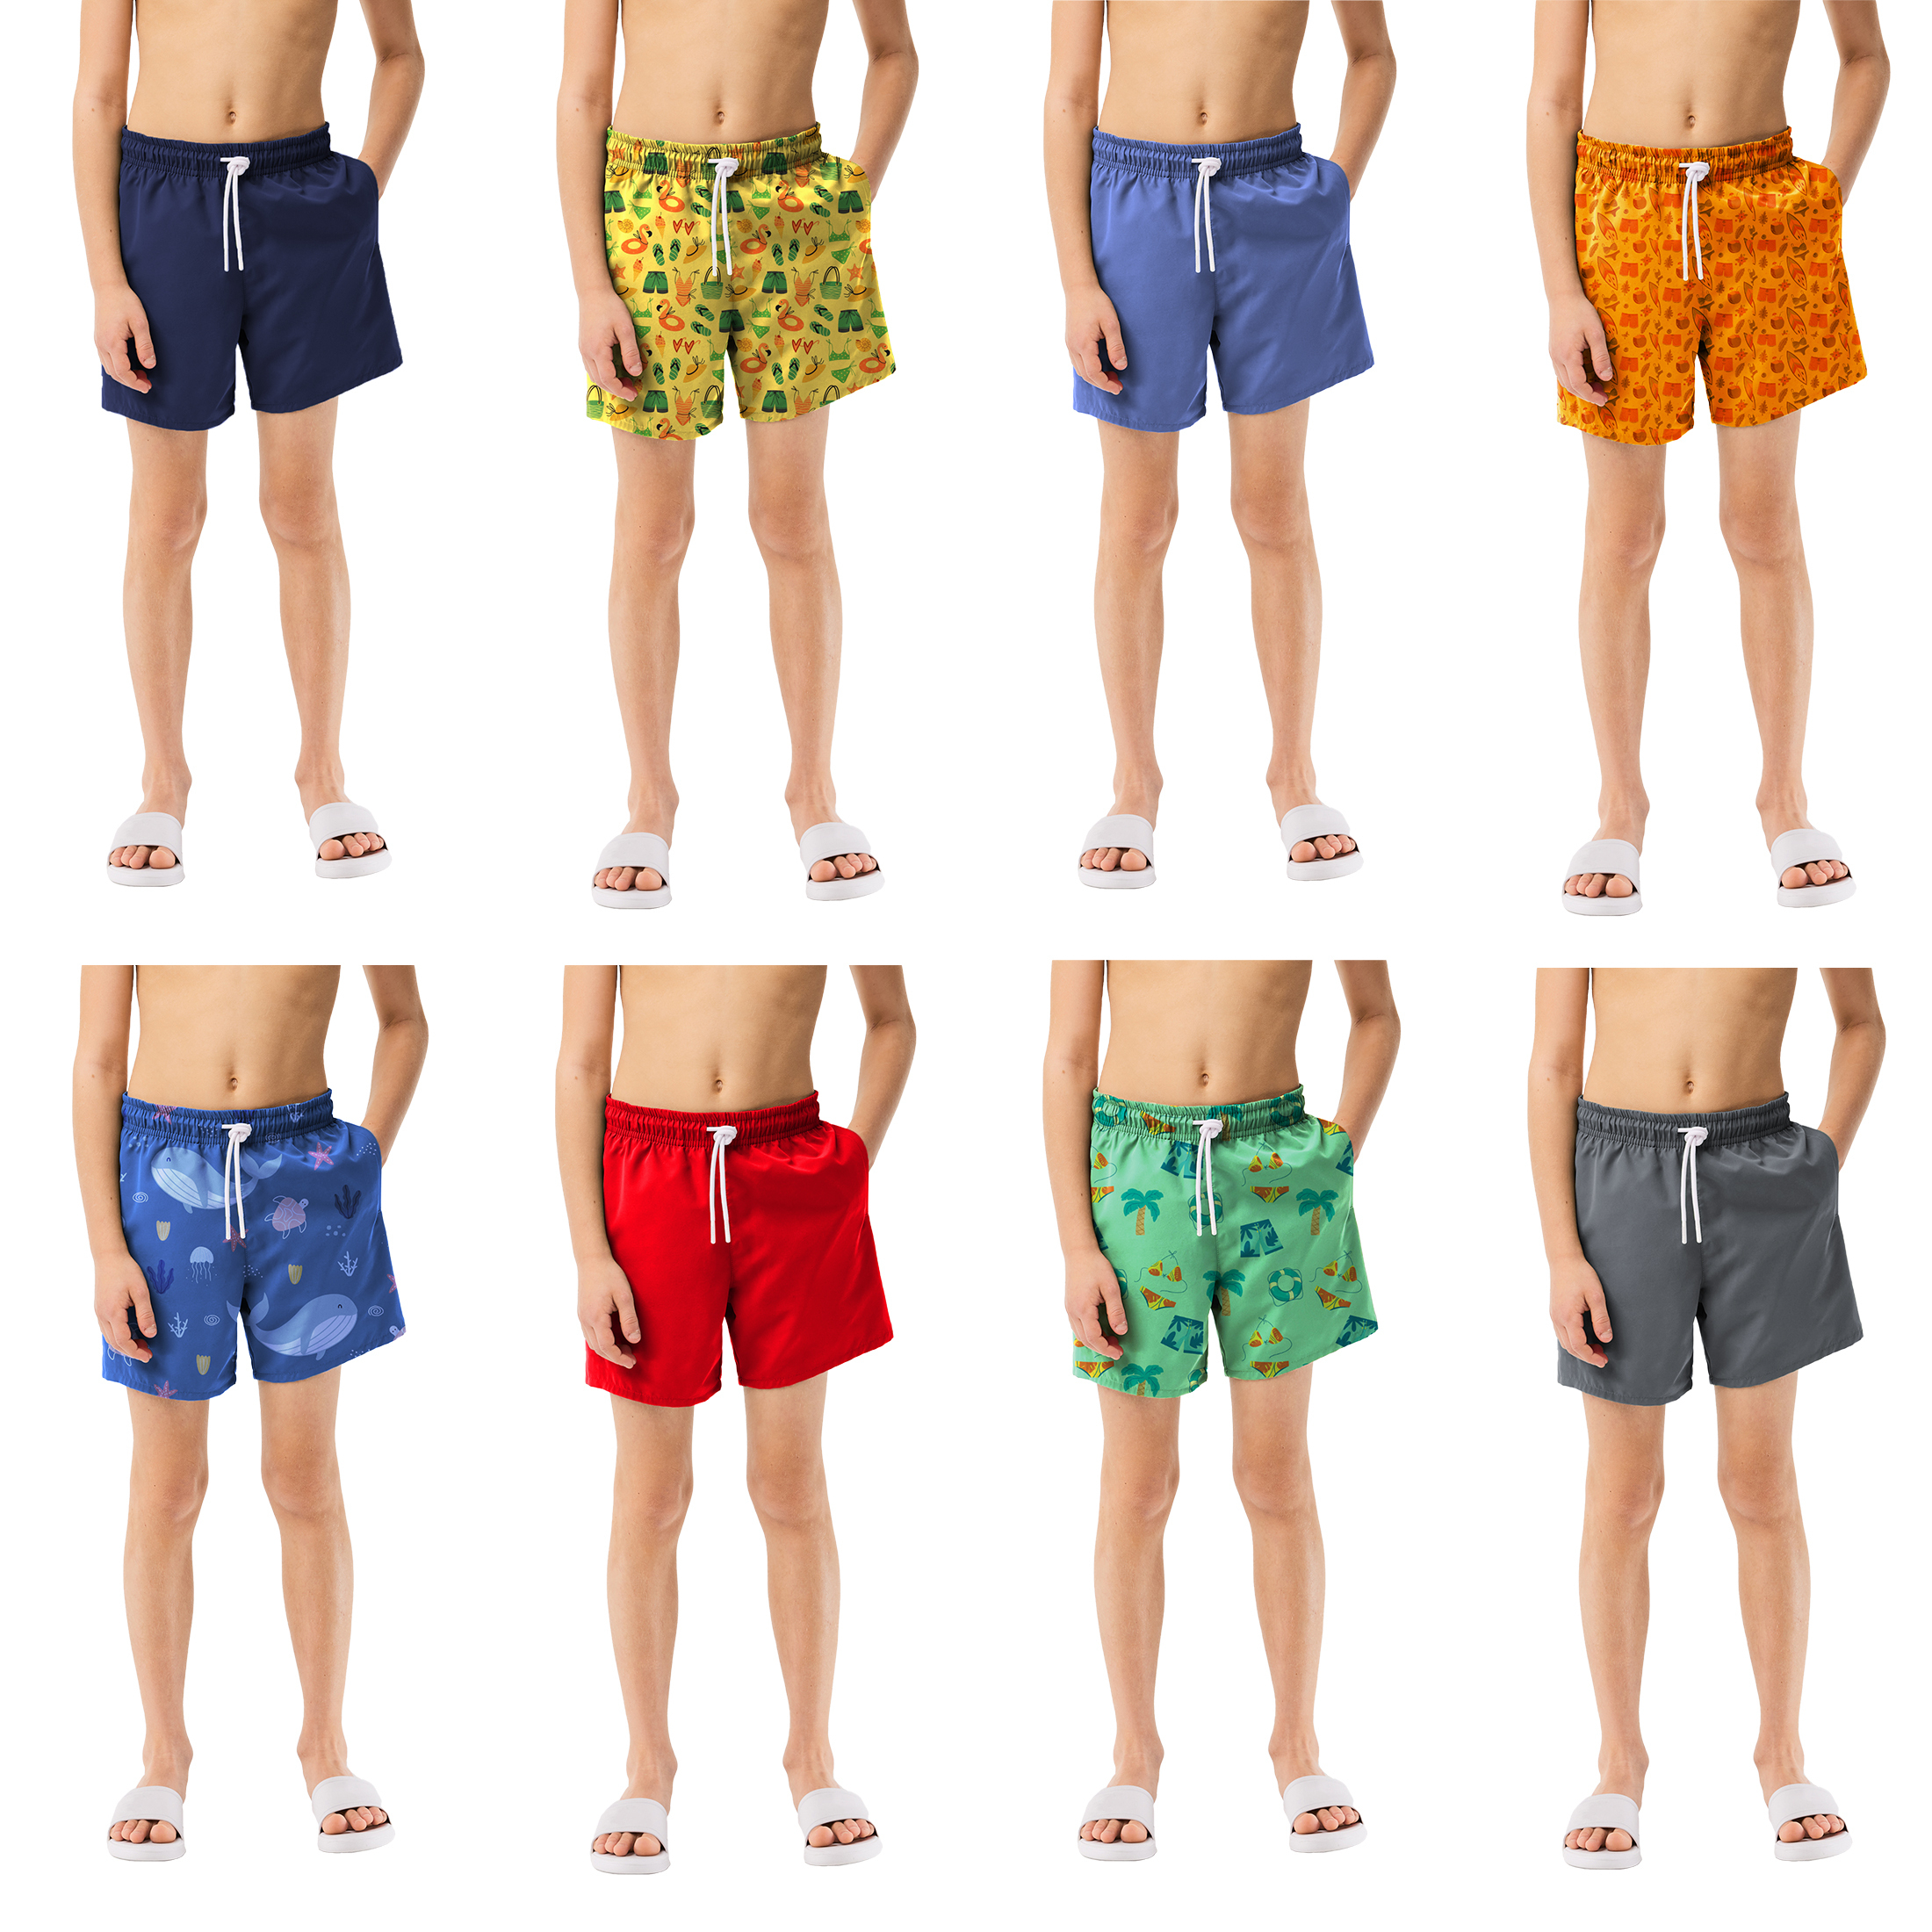 3-Pack: Boy's Quick-Dry Solid & Print Active Summer Beach Swimming Trunks Shorts - Solid, Large